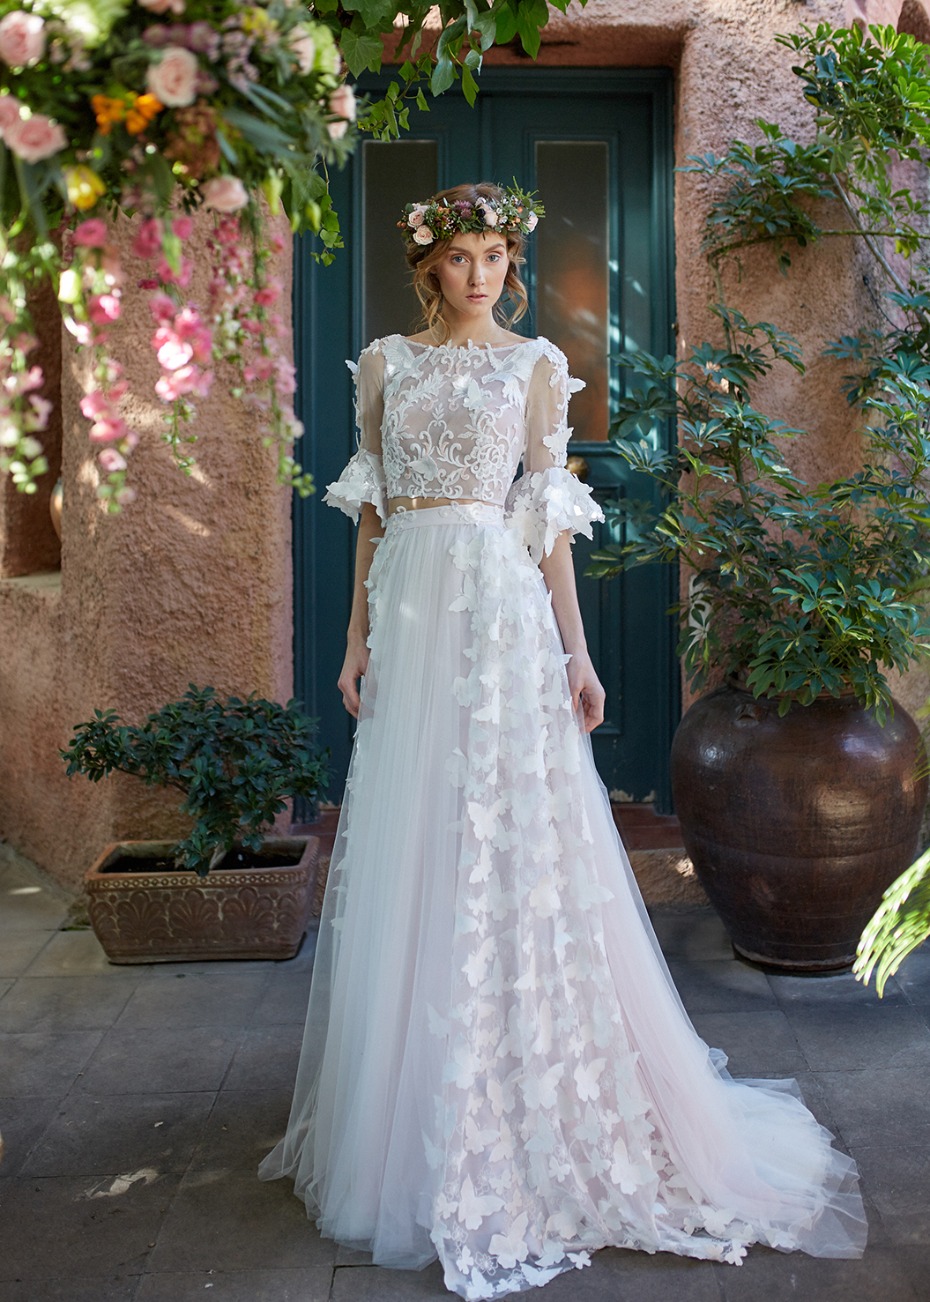 Butterfly appliquÃ© two piece wedding dress from Made Bride by Antonea